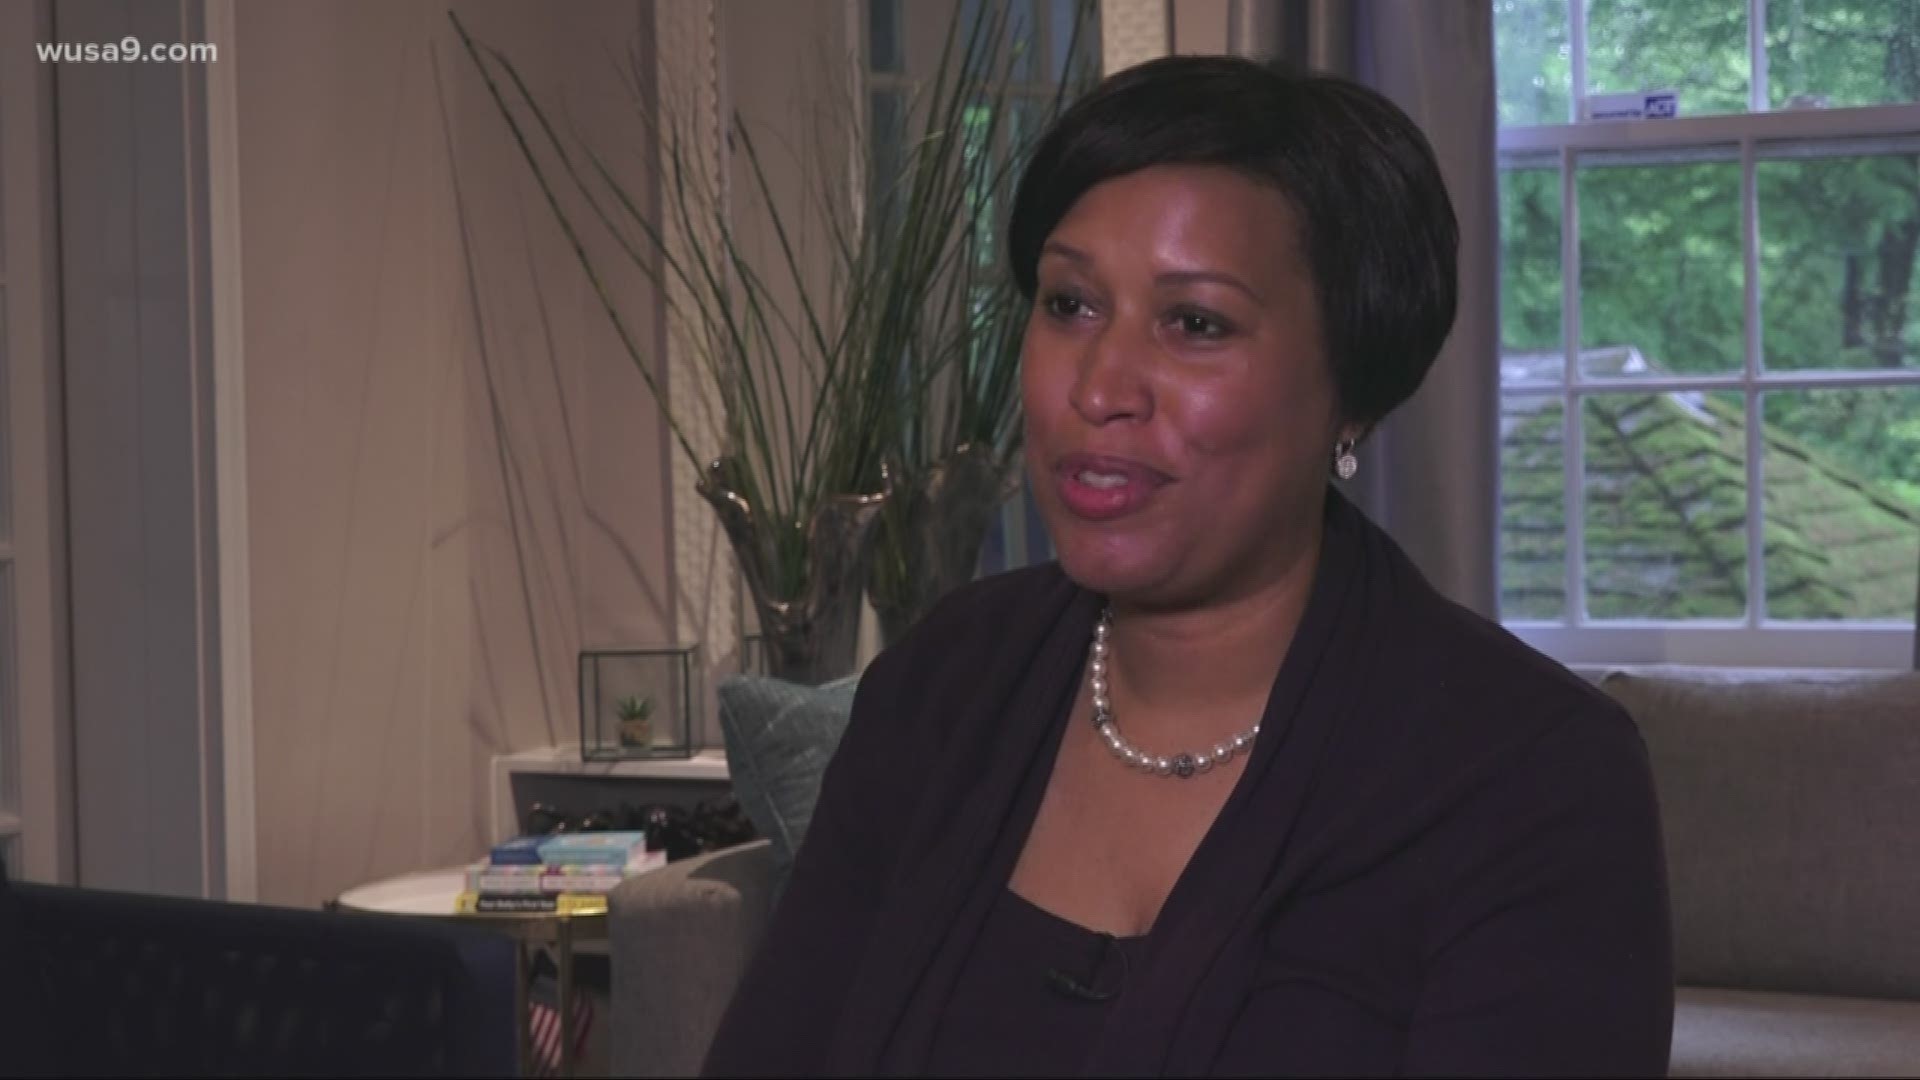 DC Mayor Muriel Bowser announced she is adopting a baby. Welcoming a new family member into your life comes with a unique set of challenges. Lisa Dominguez, Director of Clinical Services for the Center for Adoption Support and Education, discusses the cha